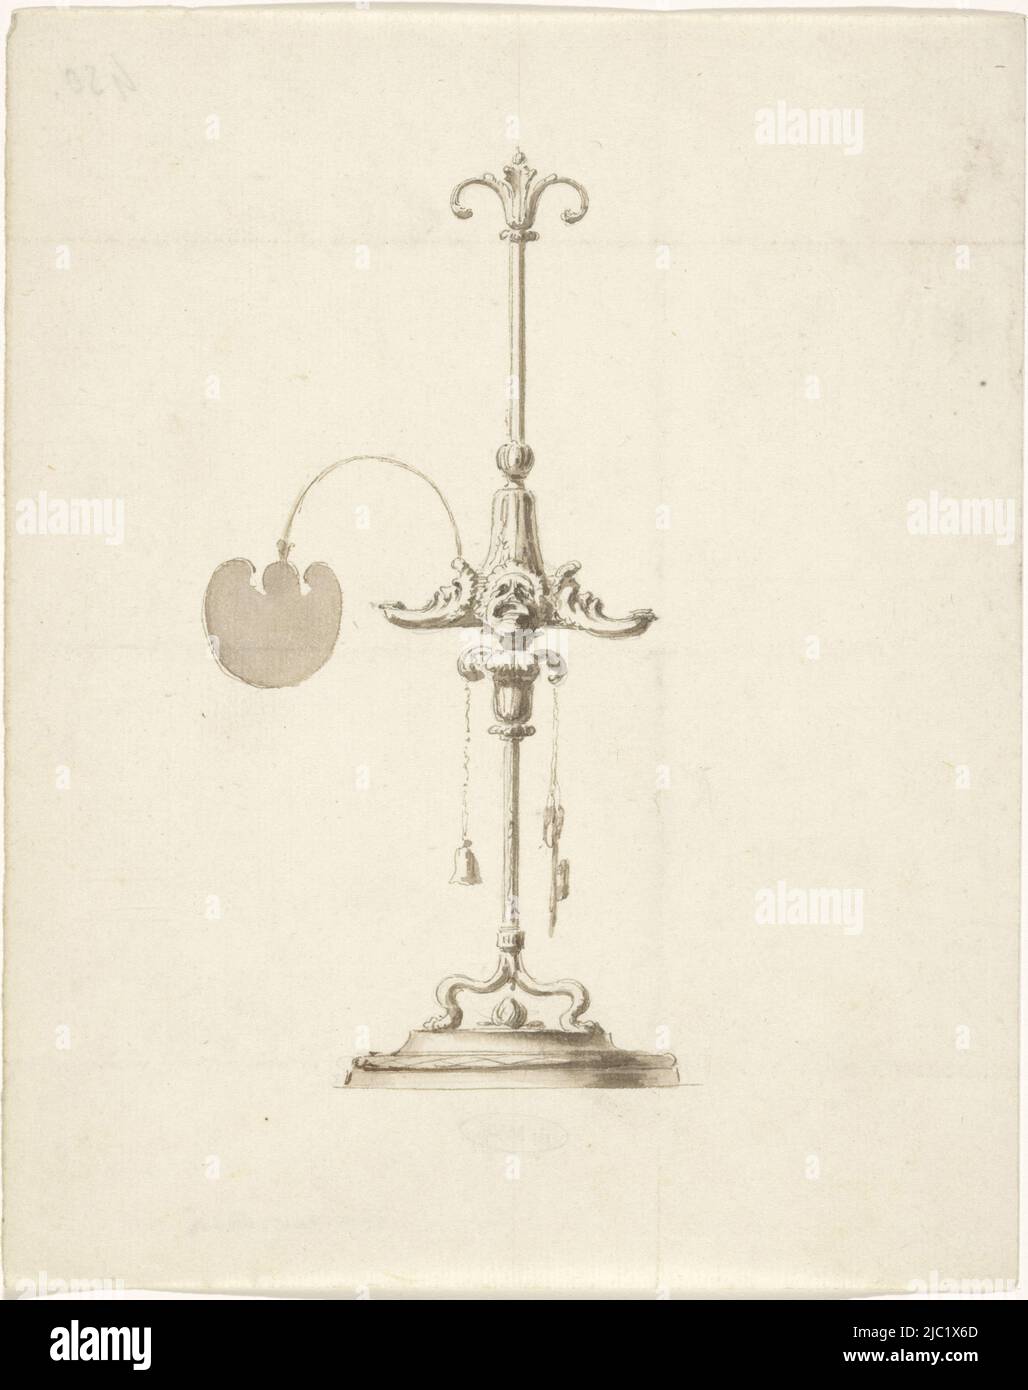 Design for an oil lamp with burners in the form of antique masks, draughtsman: Luigi Valadier, (attributed to), Rome, c. 1765 - c. 1775, paper, pen, brush, h 326 mm × w 188 mm Stock Photo